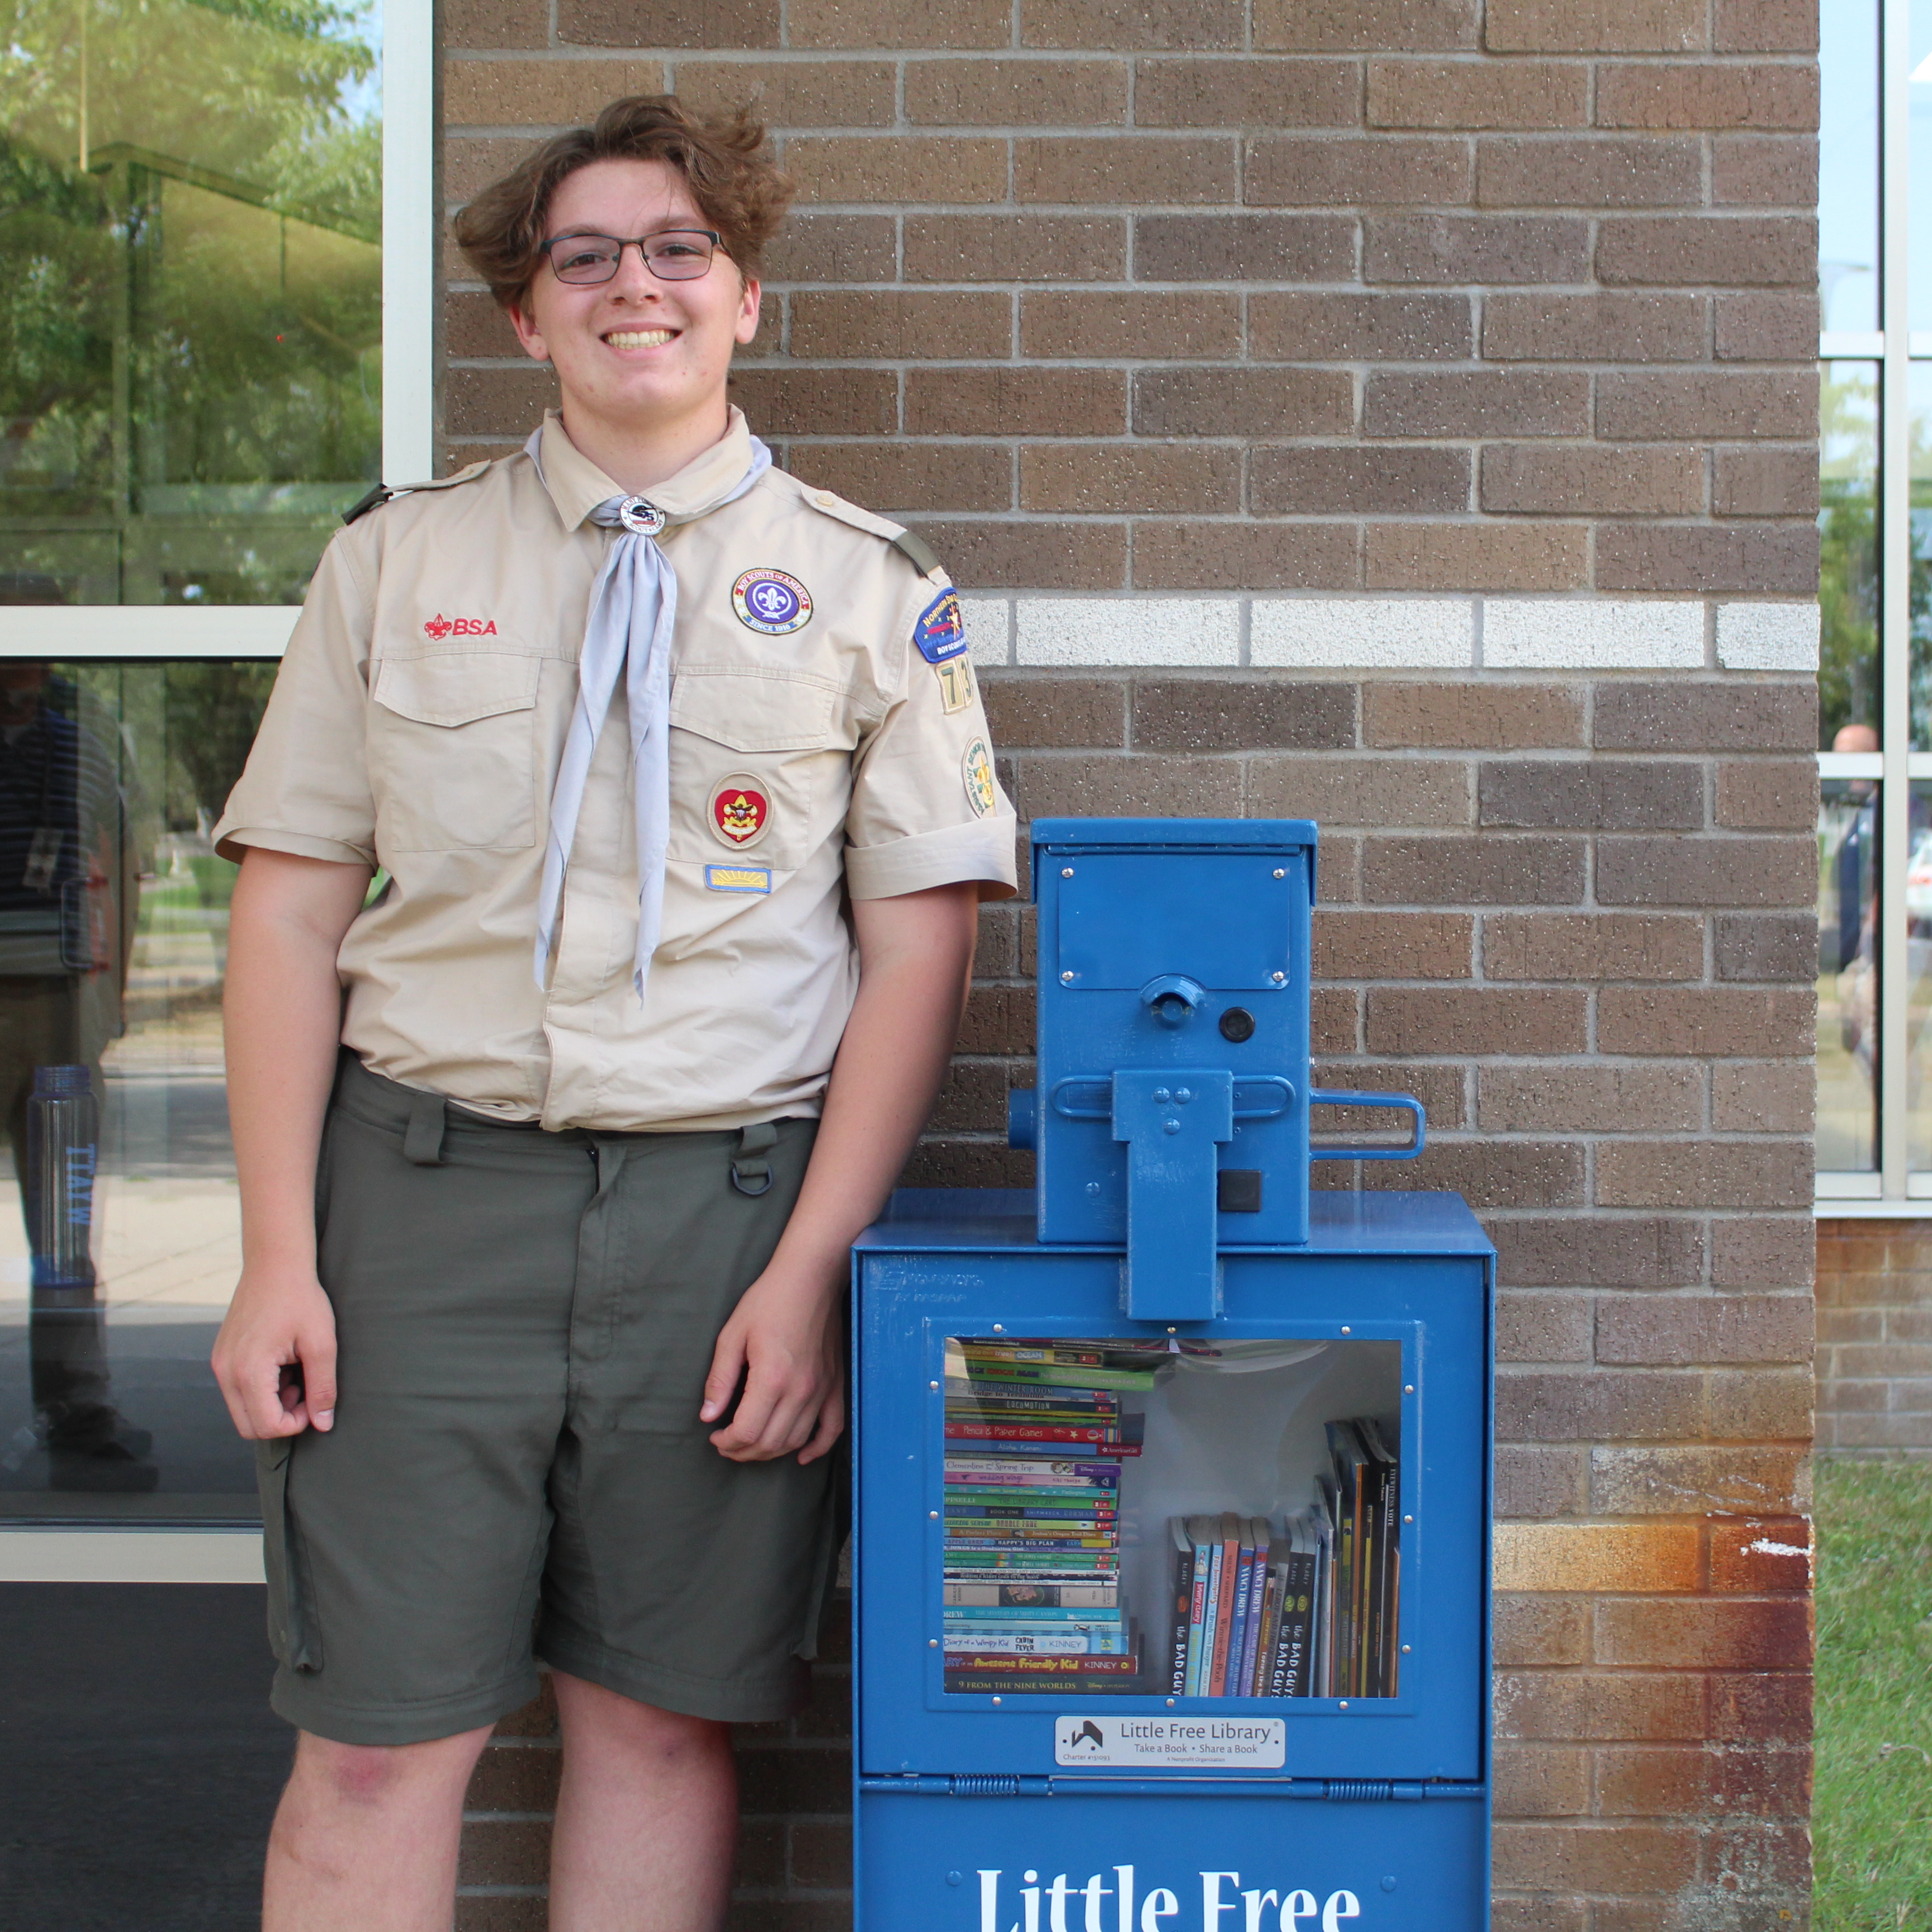 Image: Michael standing with his little free library